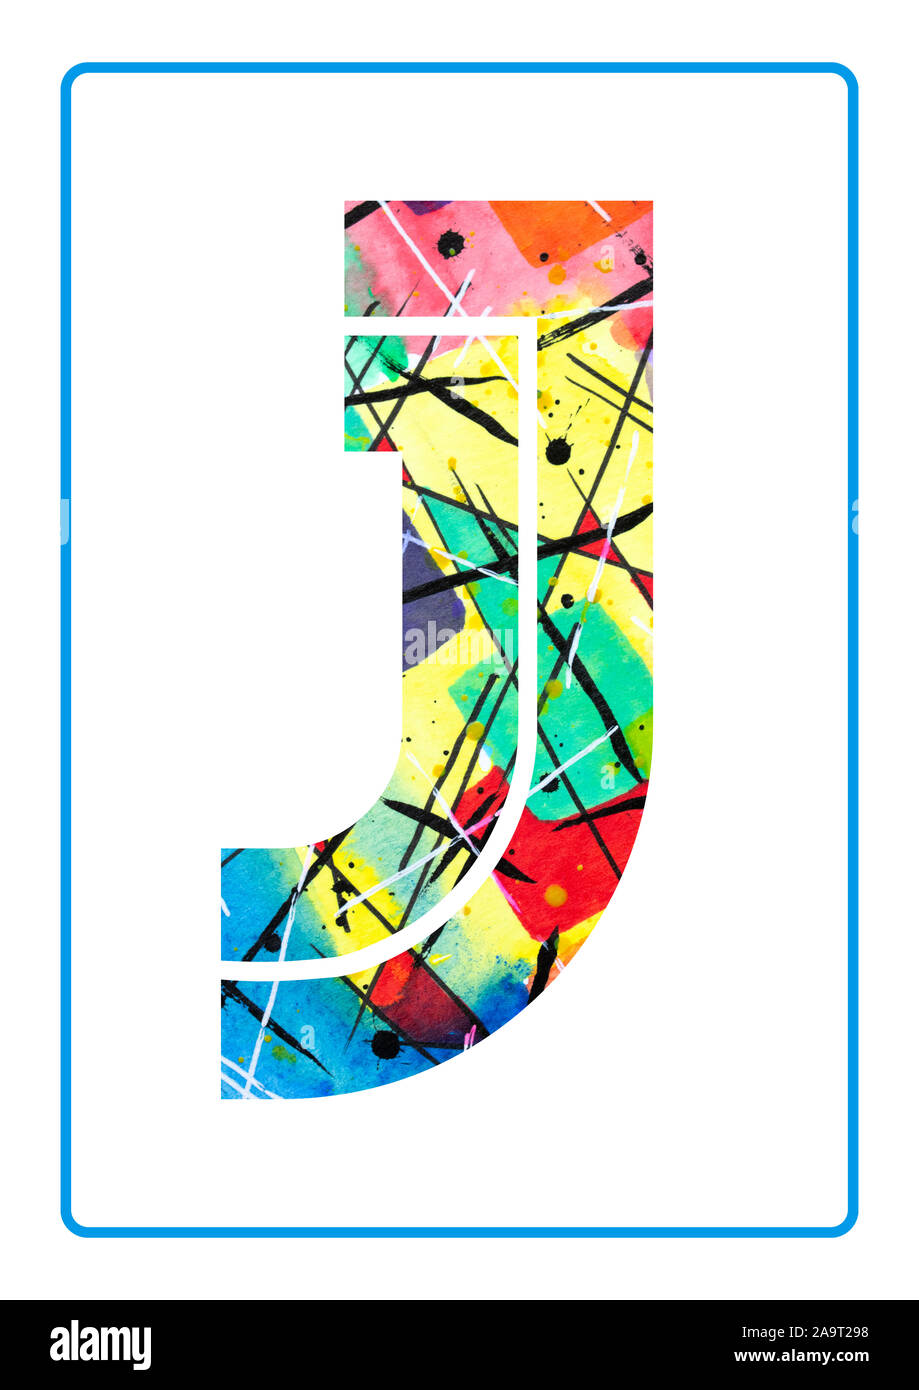 Abstract Painting Watercolor Typography Letter J Stock Photo